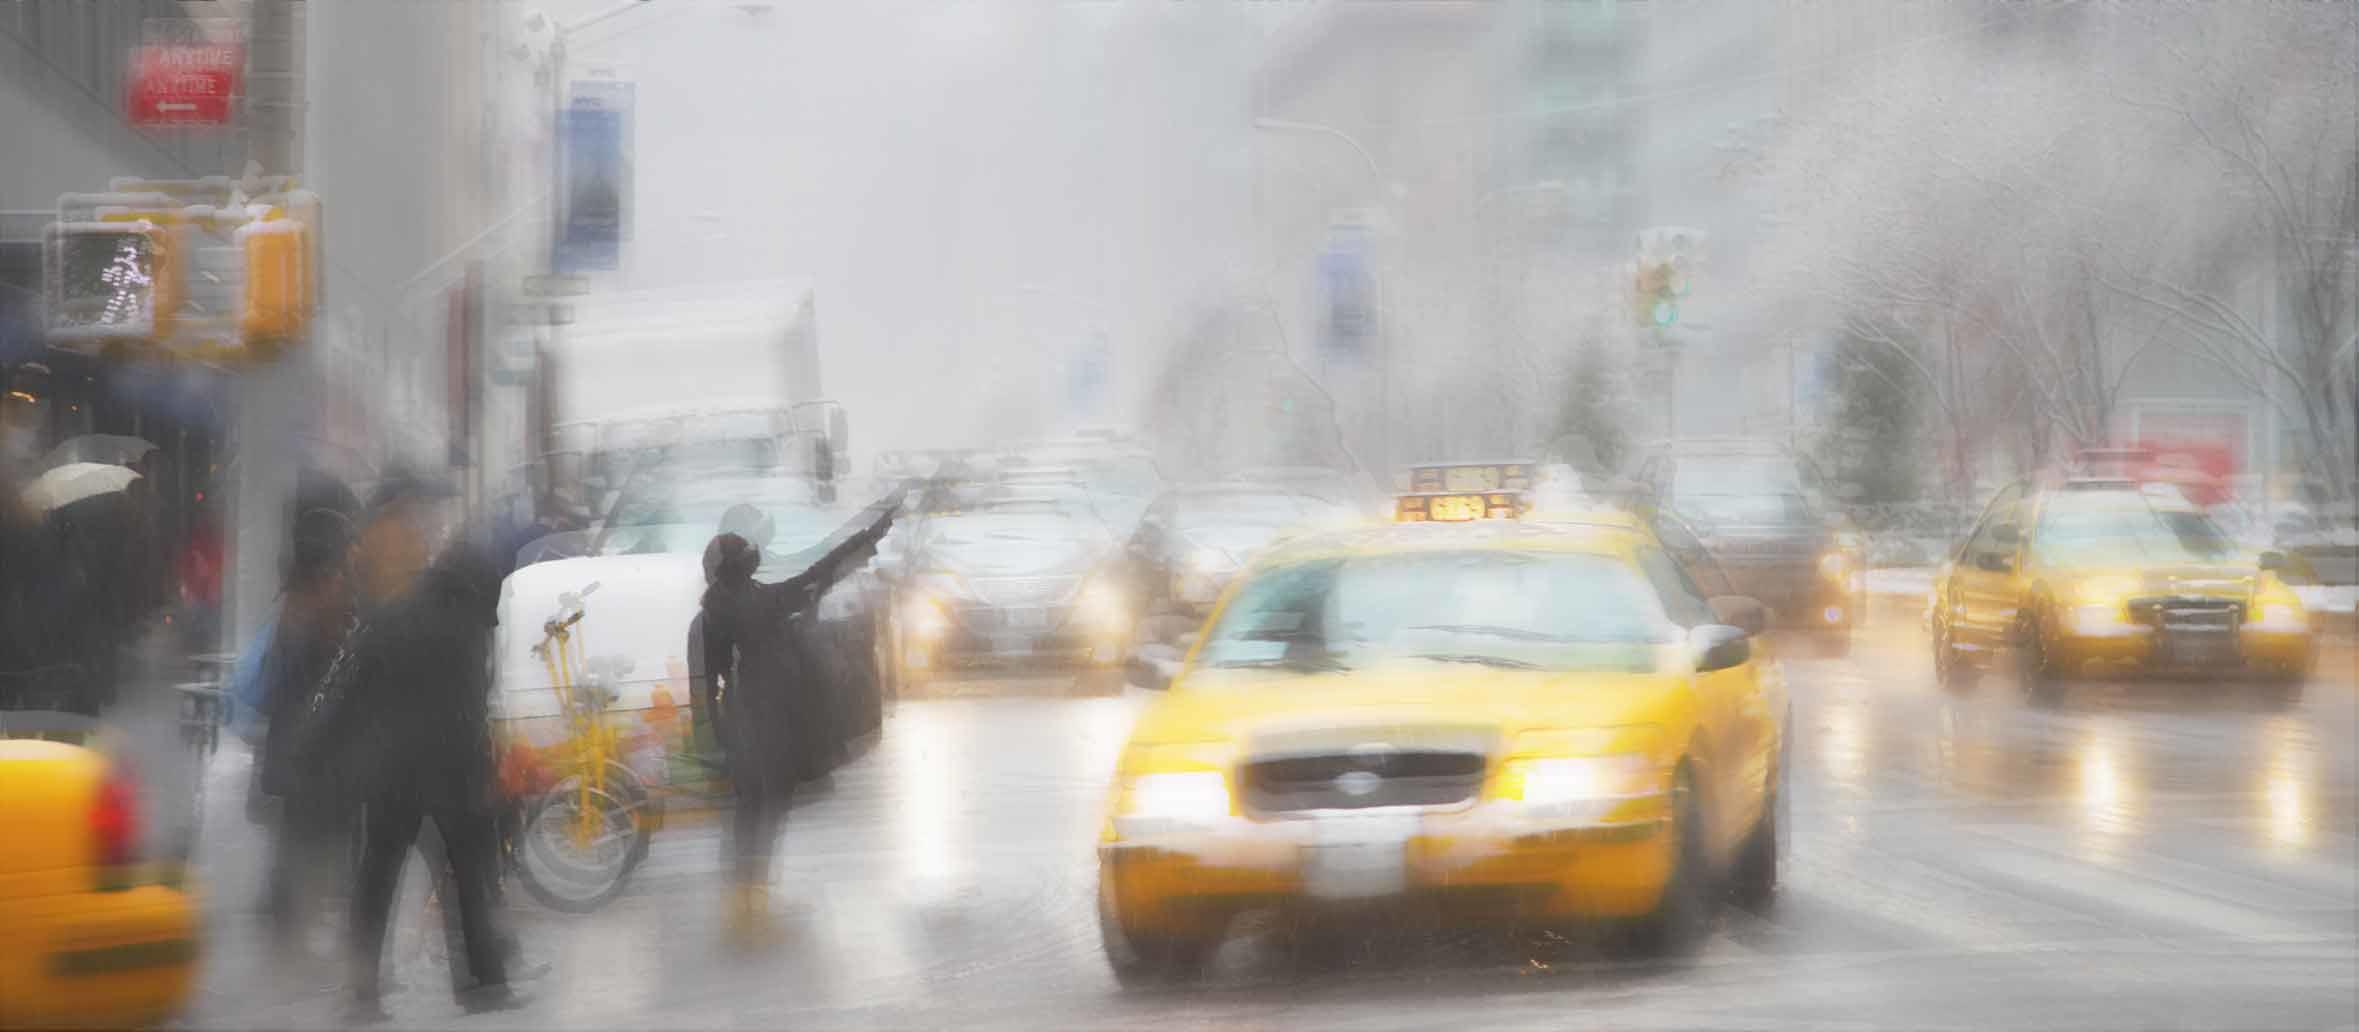 A rainy and busy day in the city blurred to simulate vision with fogged over glasses lenses